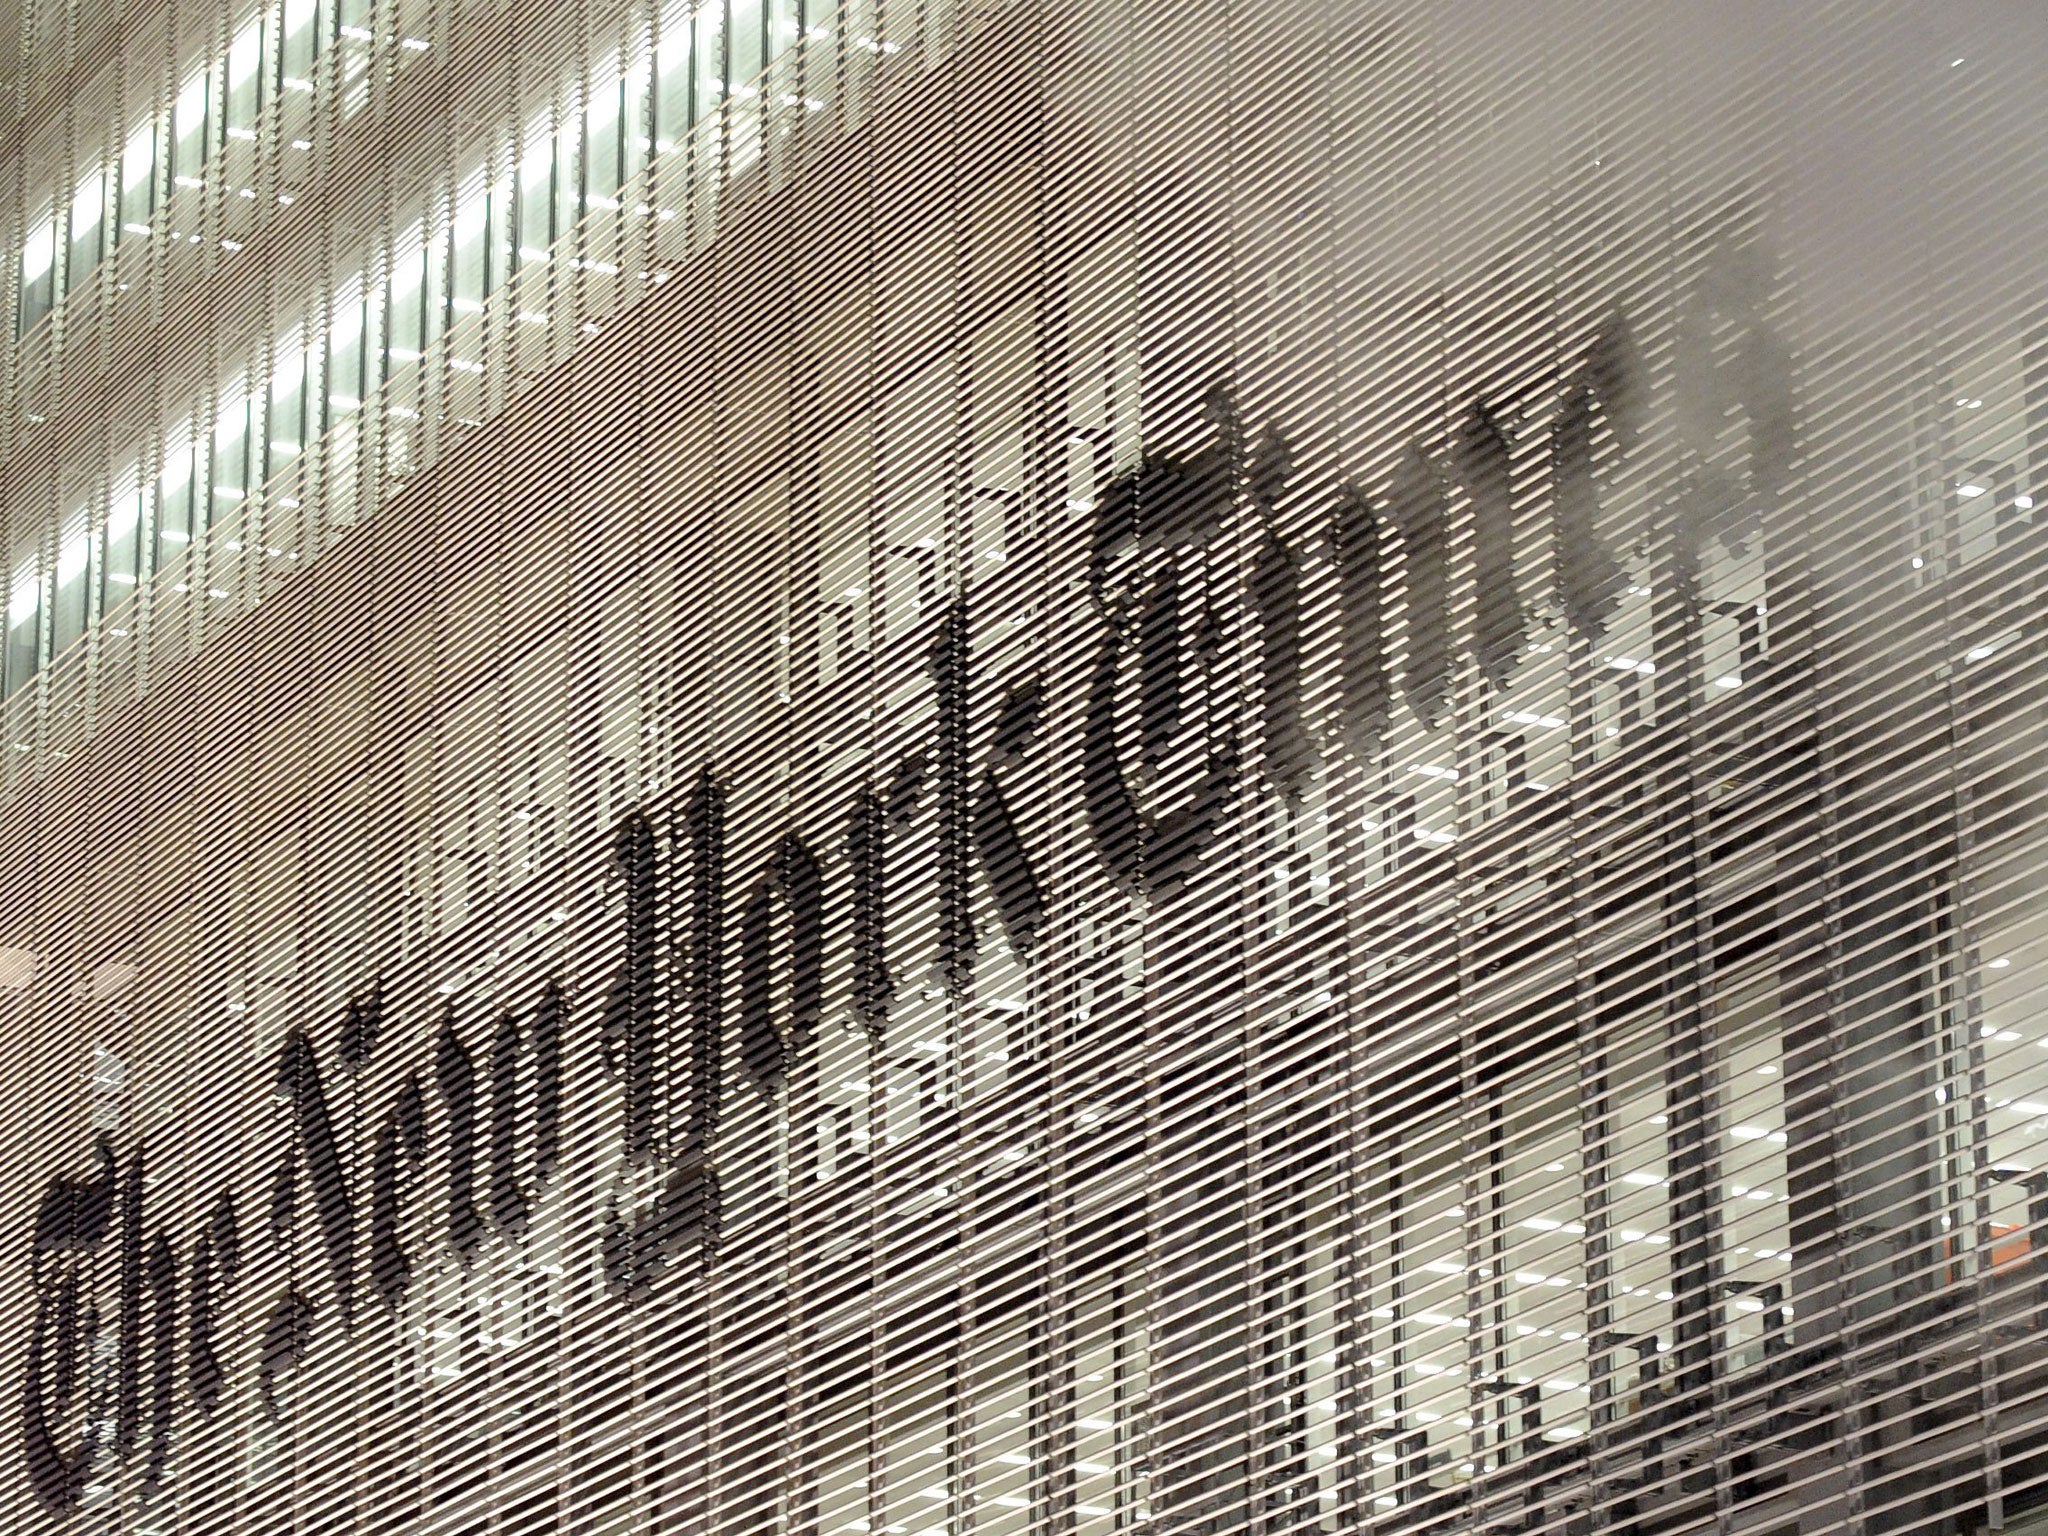 The New York Times has seen a big rise in subscribers since Donald Trump's election win